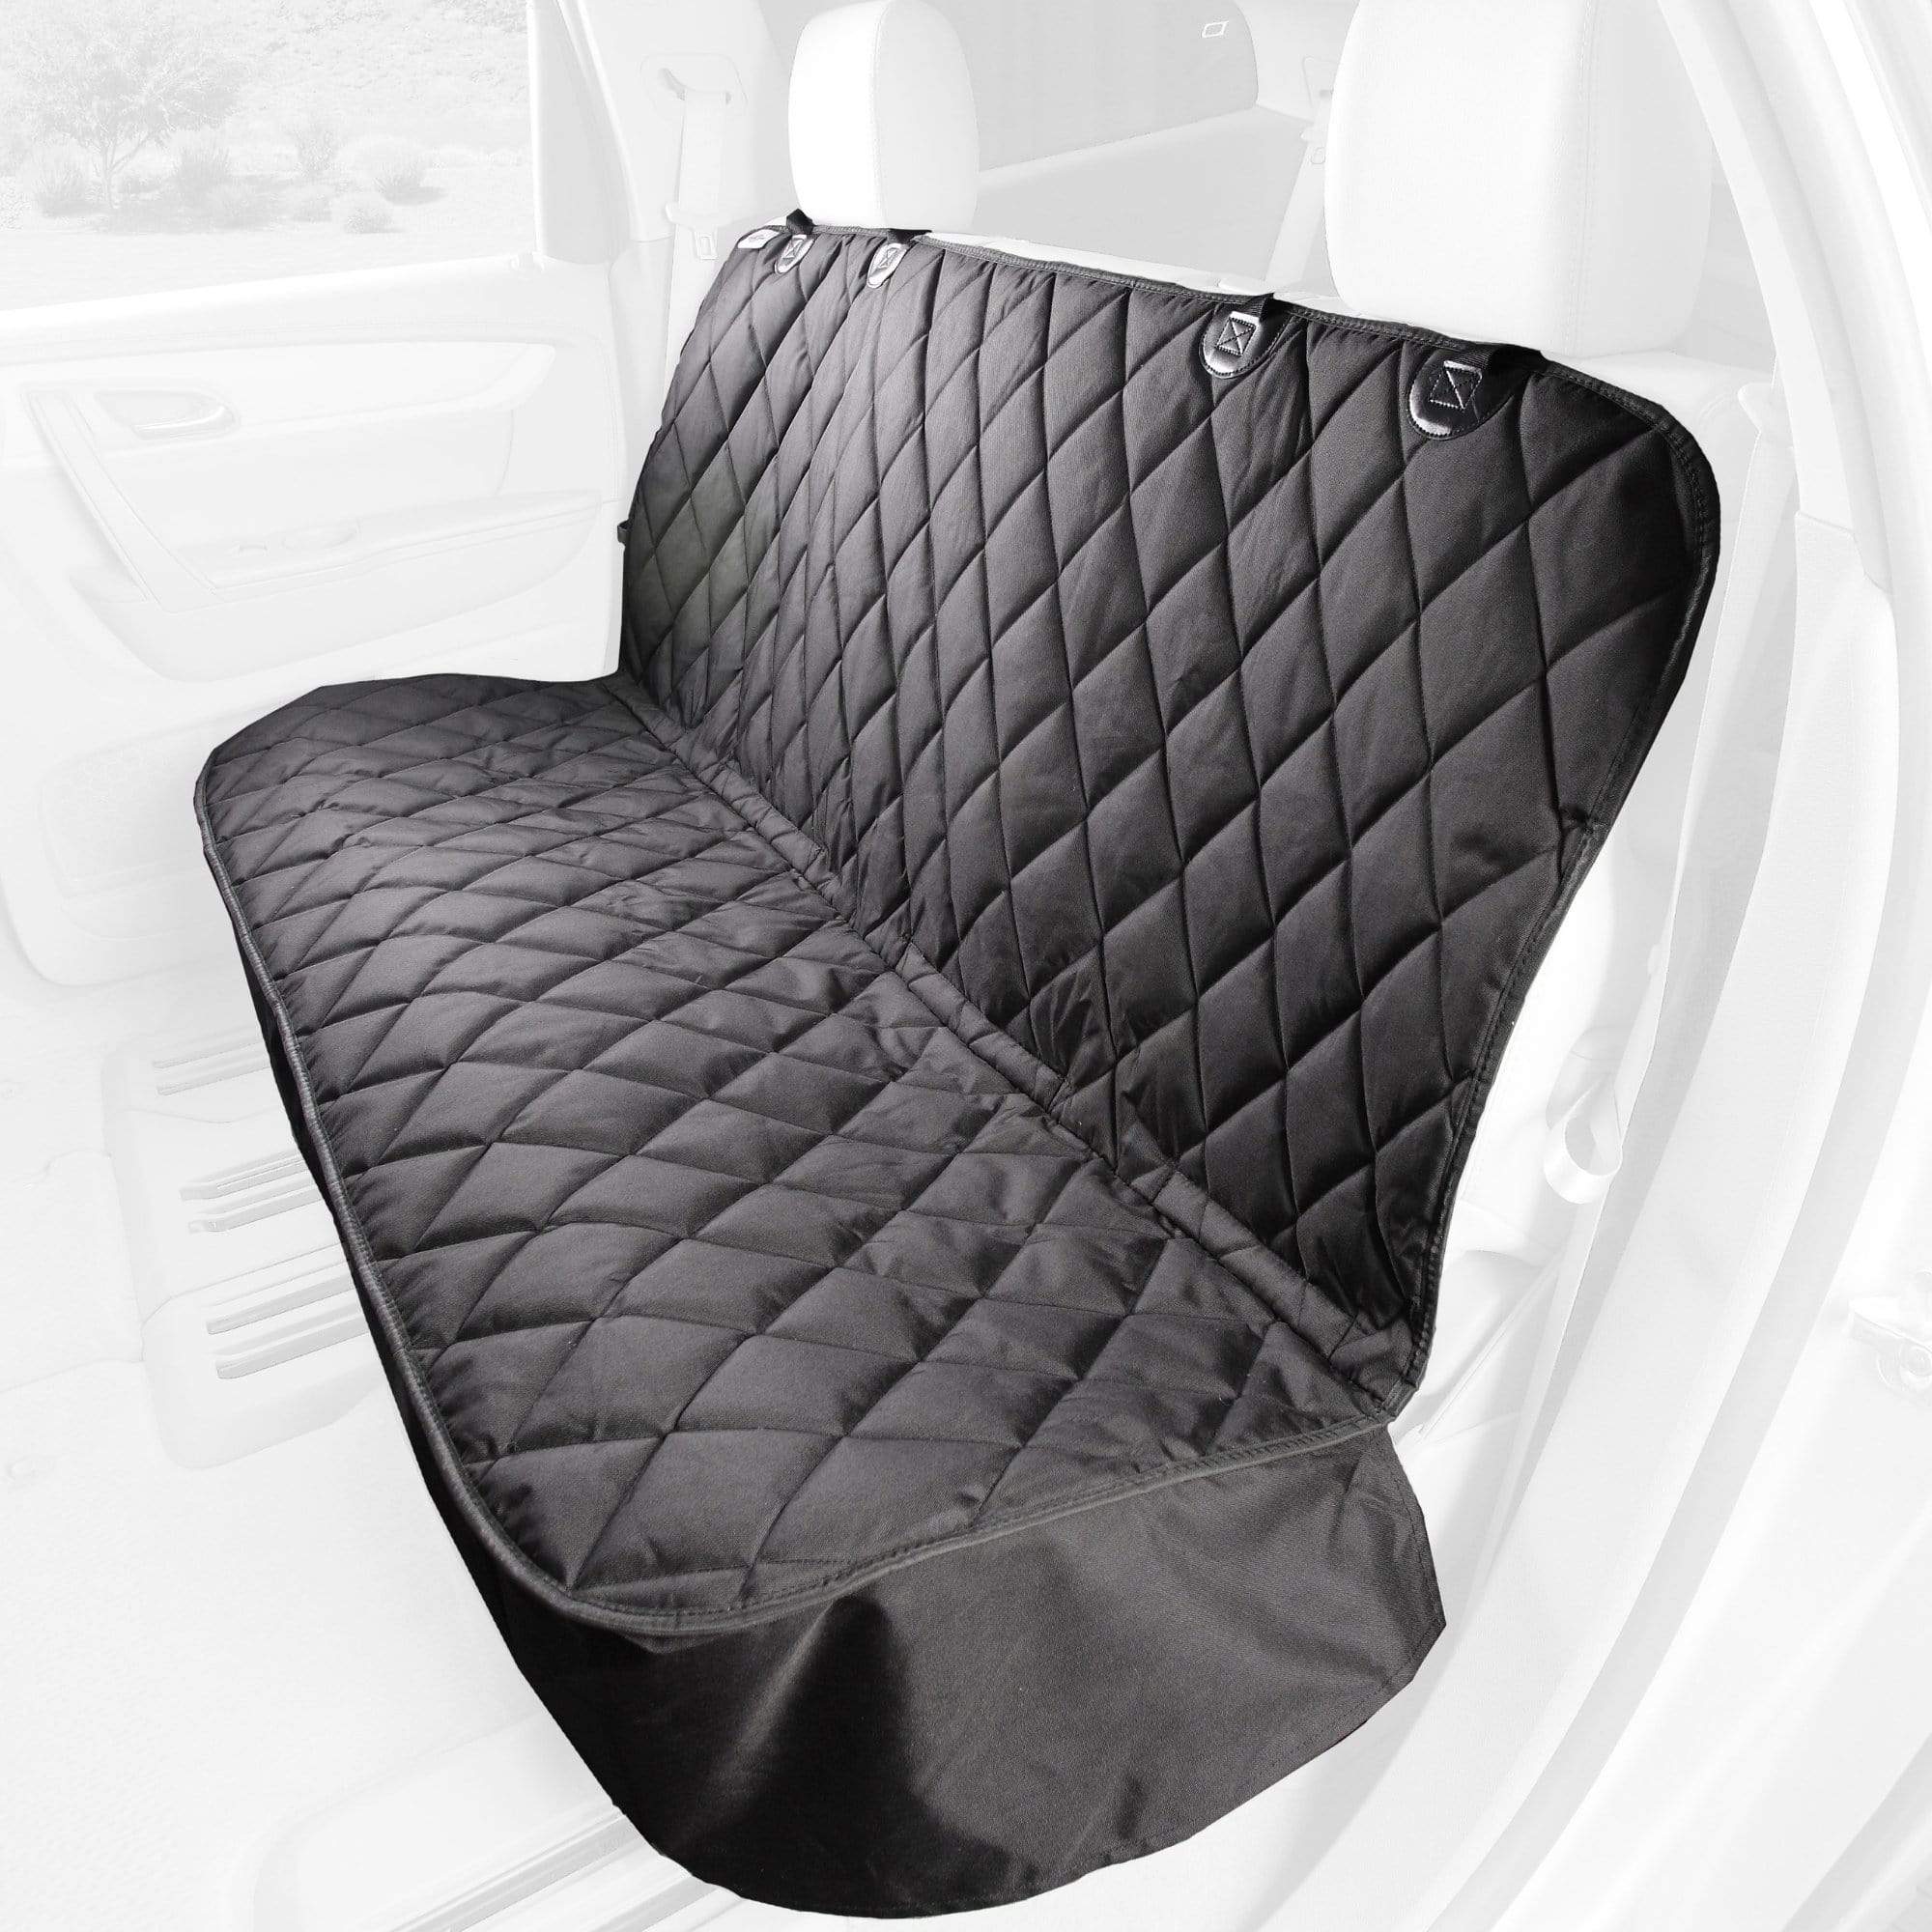 Dirty Dog 3-in-1 Car Seat Cover and Hammock – DGS Pet Products